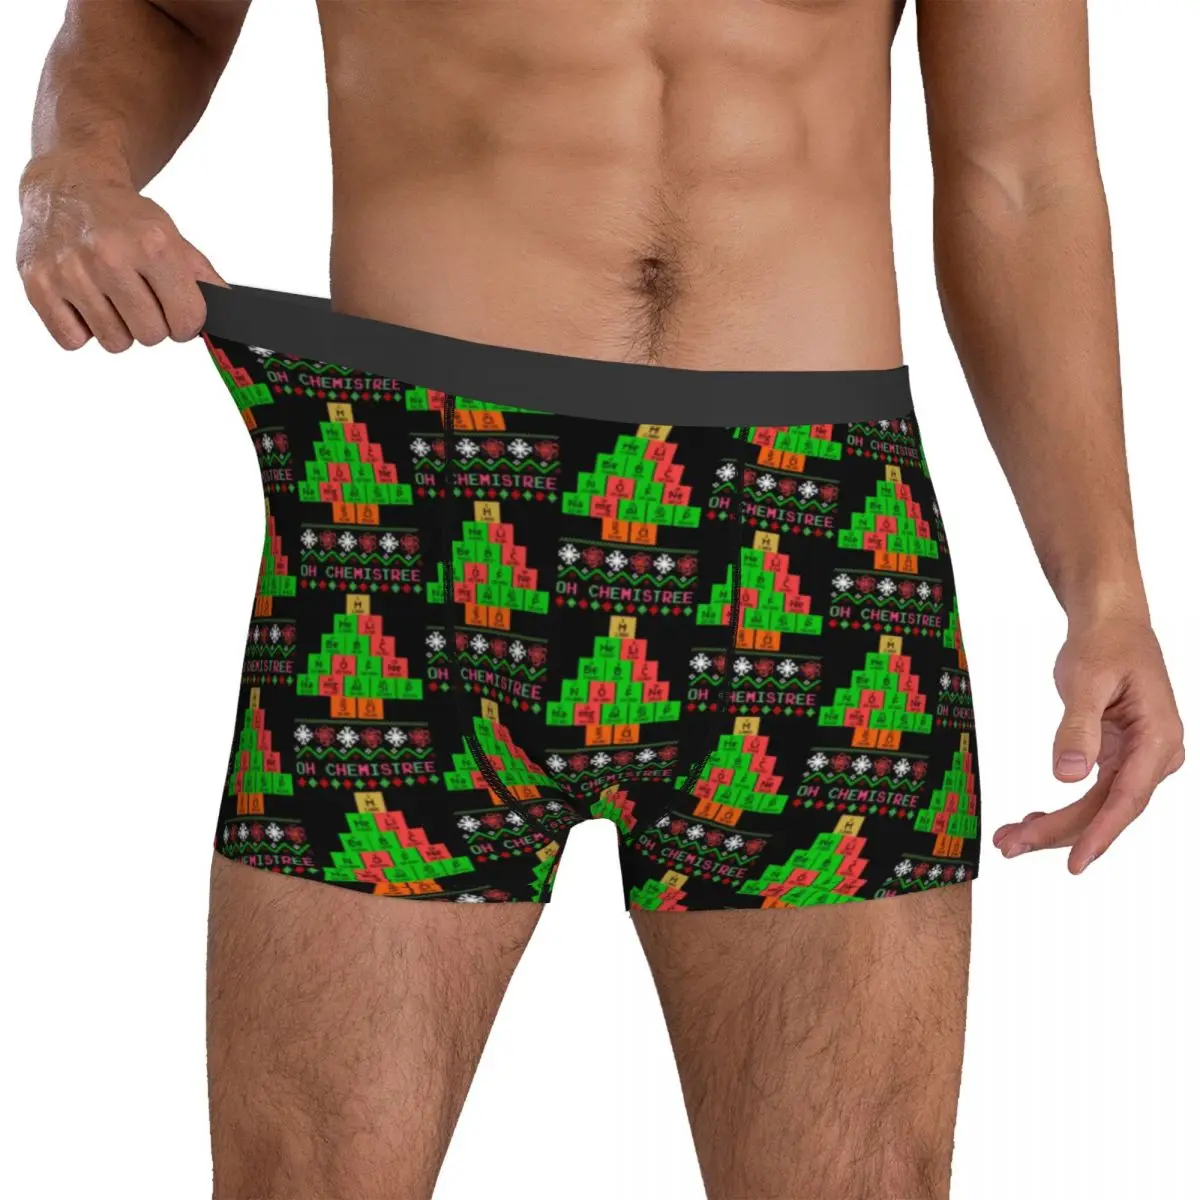 

Abstract Christmas Tree Underwear Holiday Print Sublimation Boxer Shorts Hot Men Underpants Funny Shorts Briefs Gift Idea